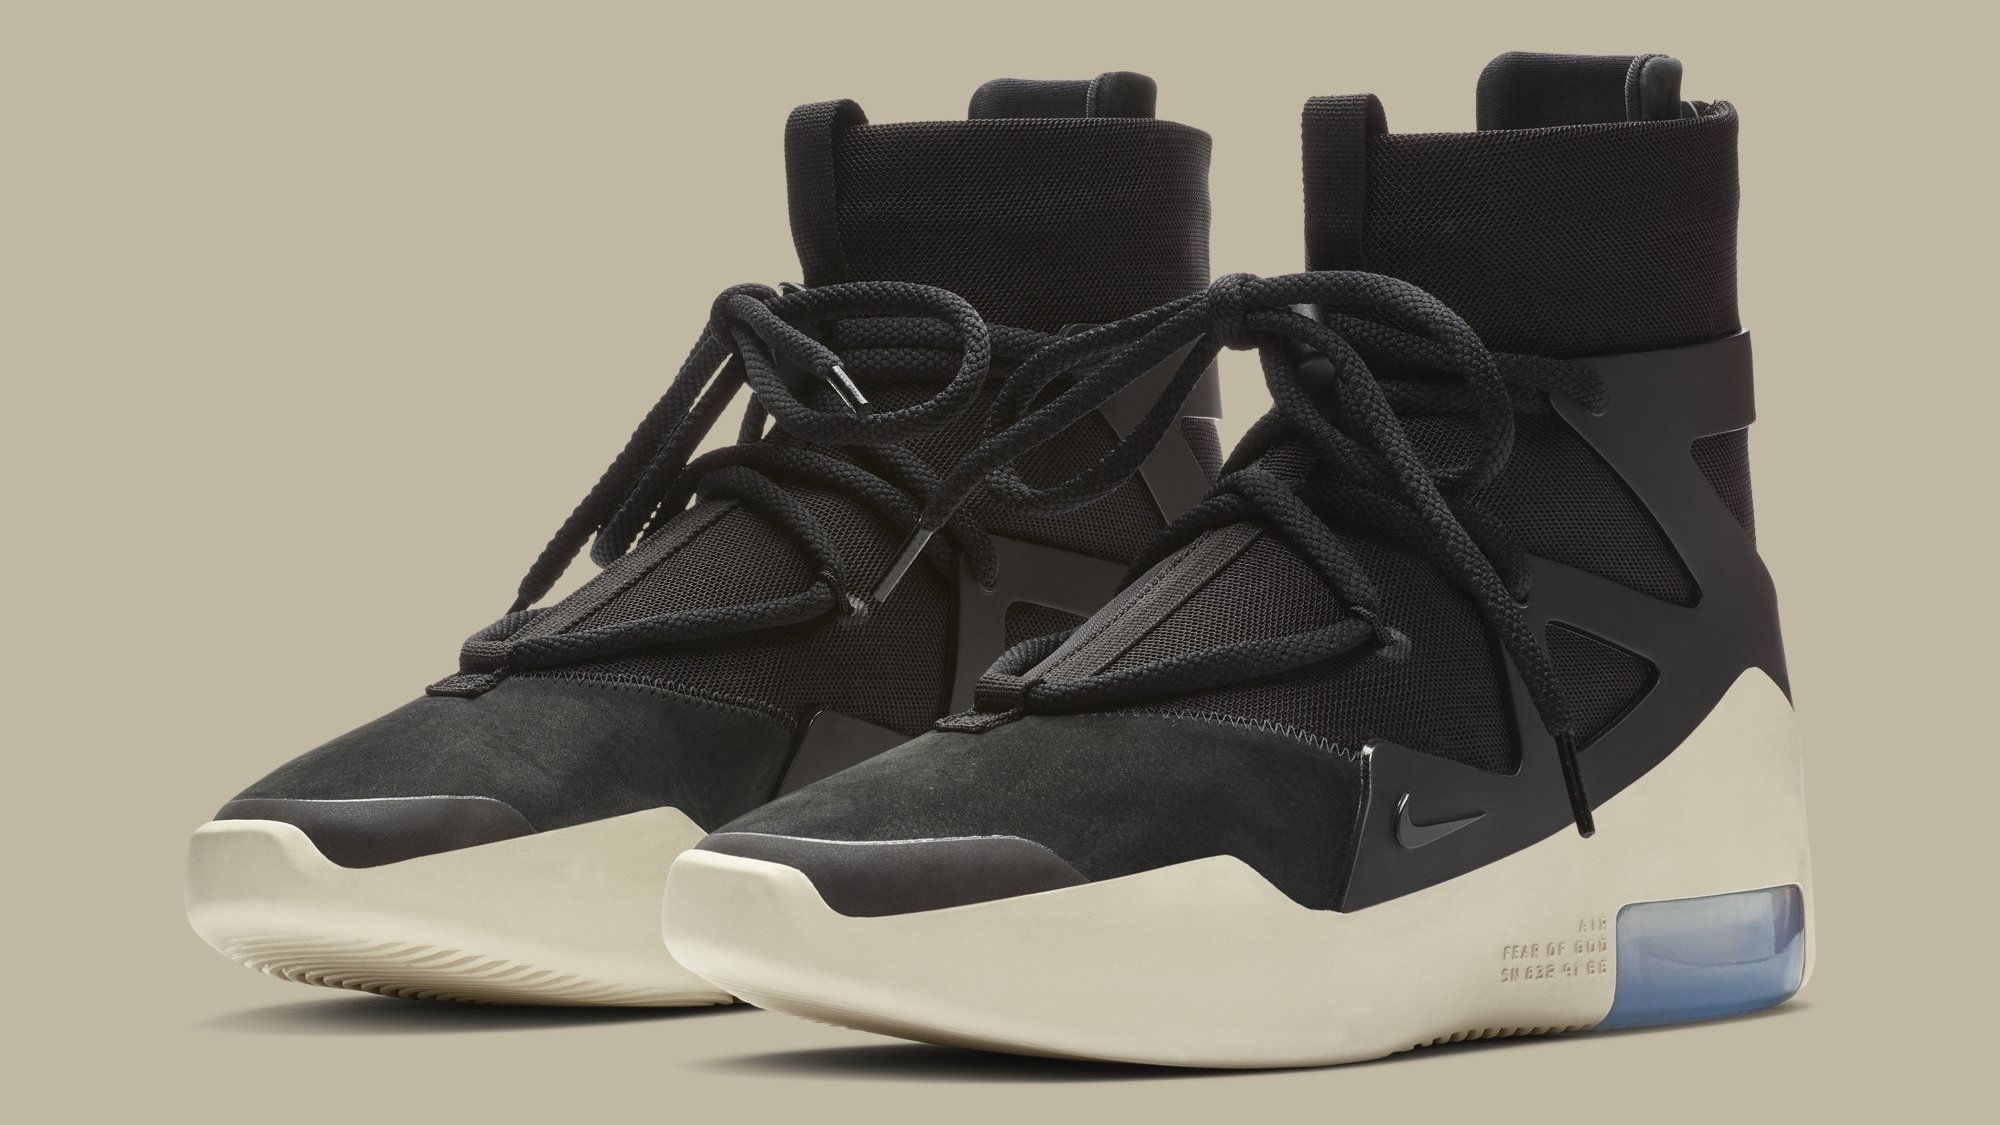 The Air Fear of God 1 Finally Drops This Weekend | Complex